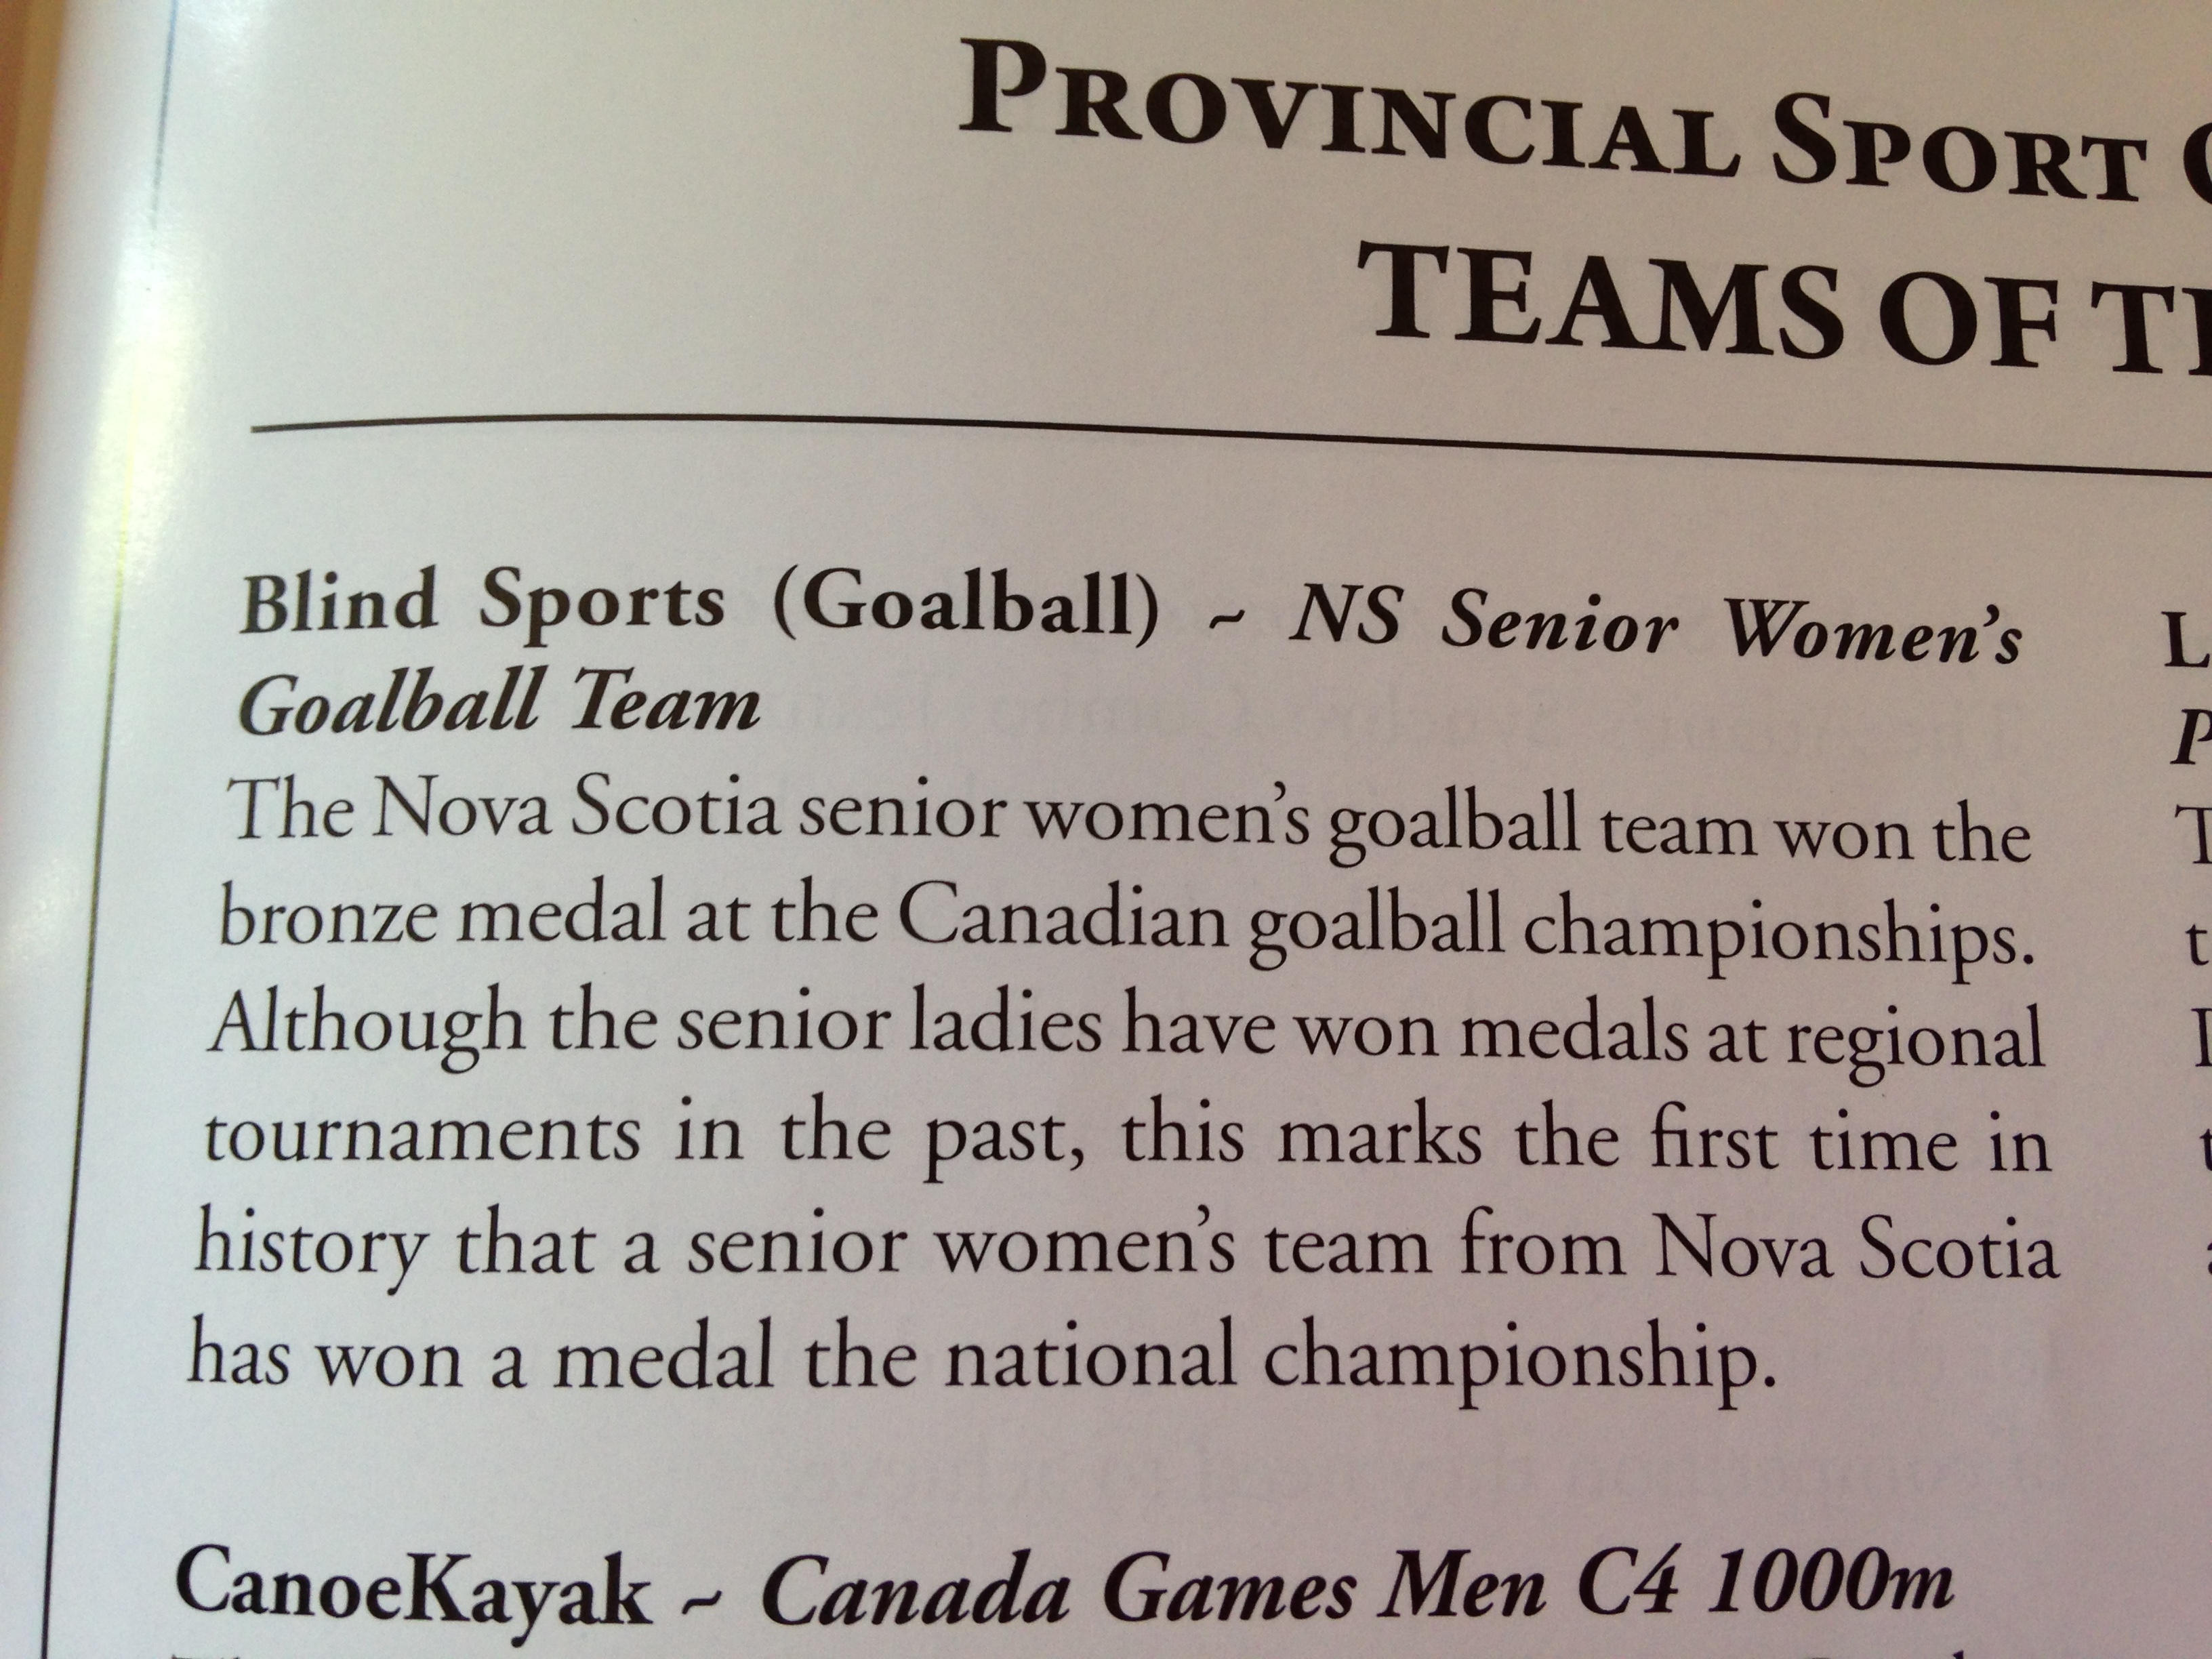 The Nova Scotia senior women's goalball team won the bronze medal at the Canadian goalball championships. Although the senior ladies have won medals at regional tournaments in the past, this marks the first time in history that a senior women's team from Nova Scotia has won a medal at the national championship. — with Stephanie Berry, Nancy Morin, Tarah Sawler and Jennie Bovard in Halifax, Nova Scotia.